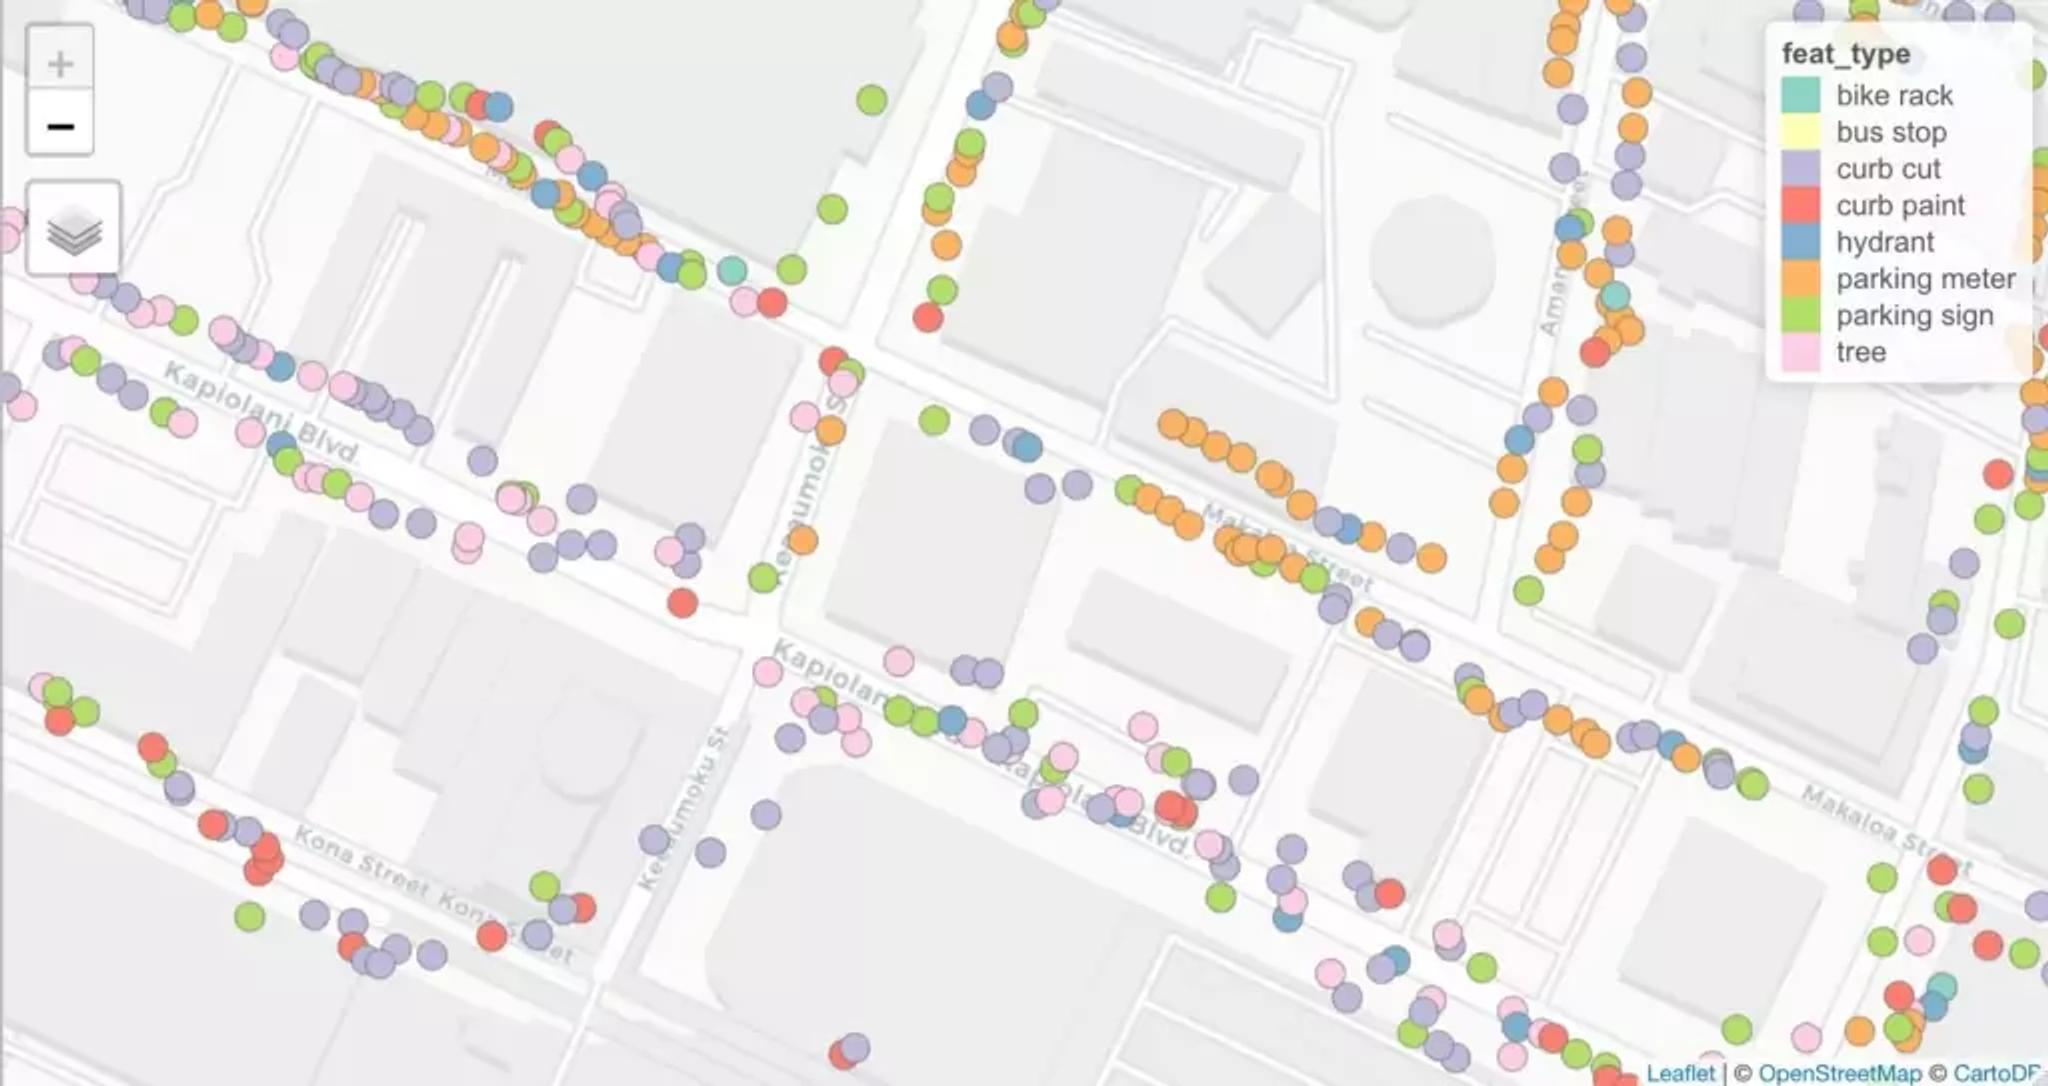 Visualization of curb inventory data collected using traditional GPS